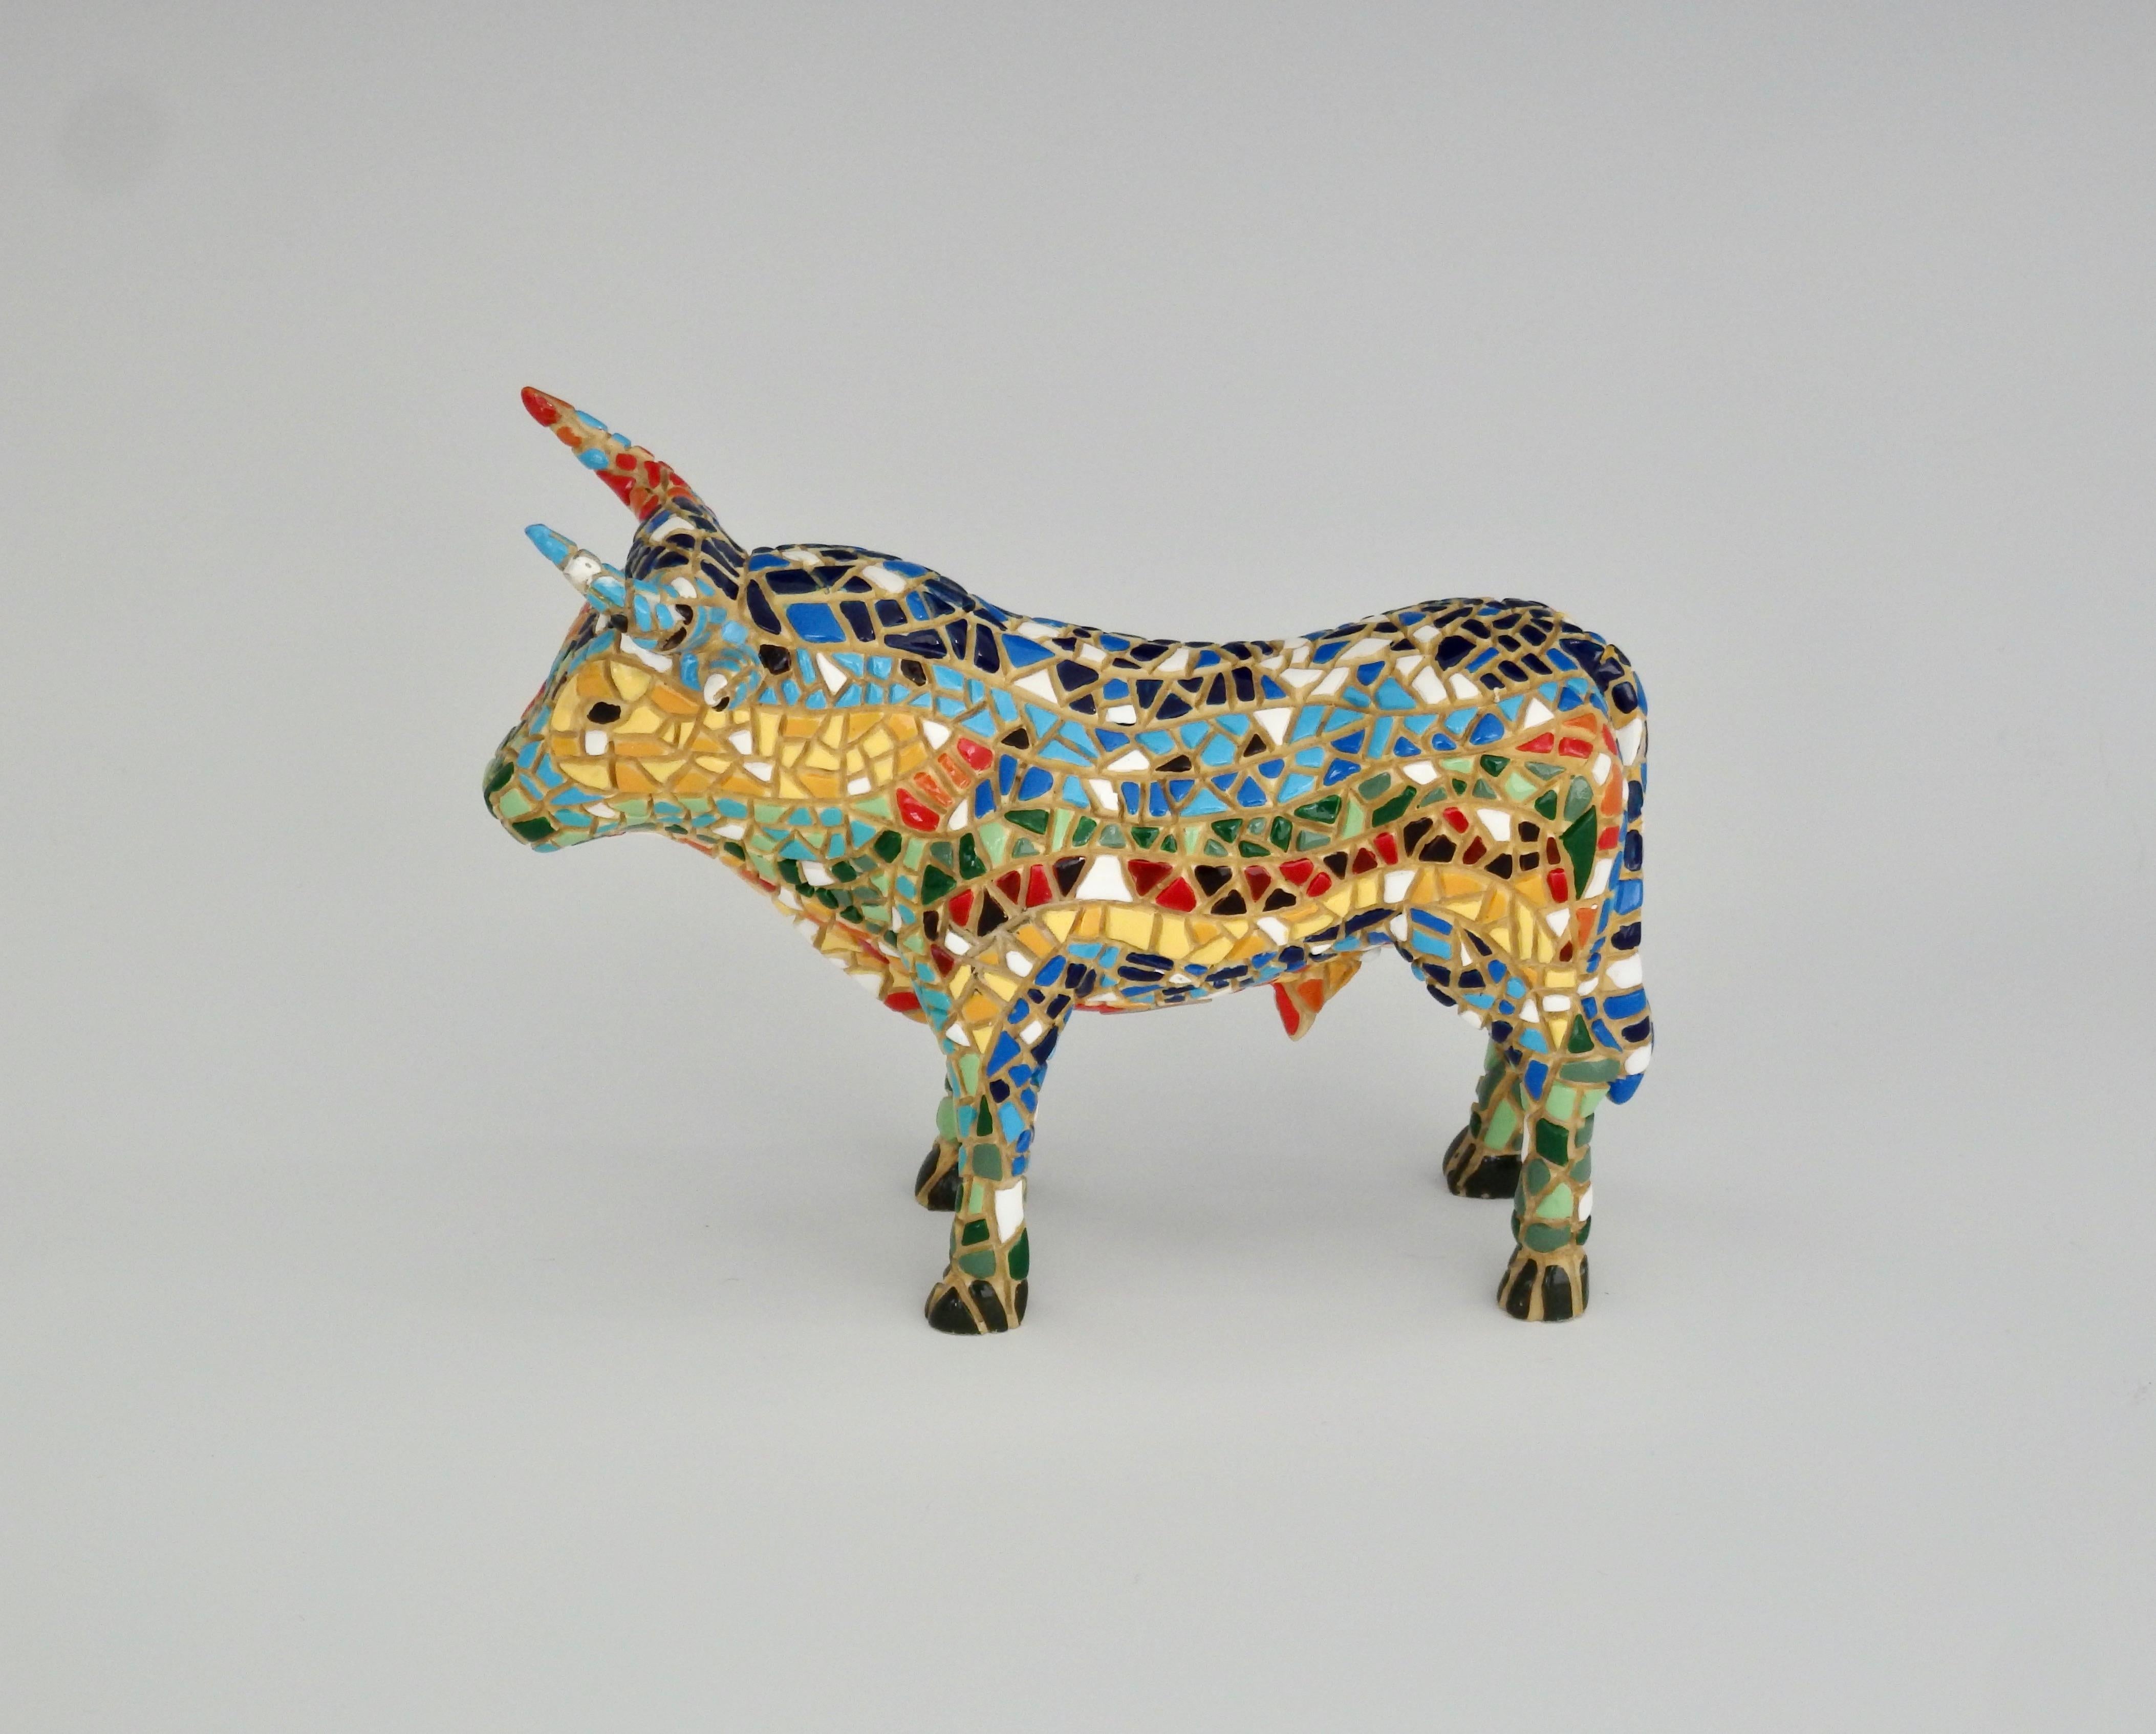 Intricately hand painted mosaic style with bright colors to give the bull form and definition.